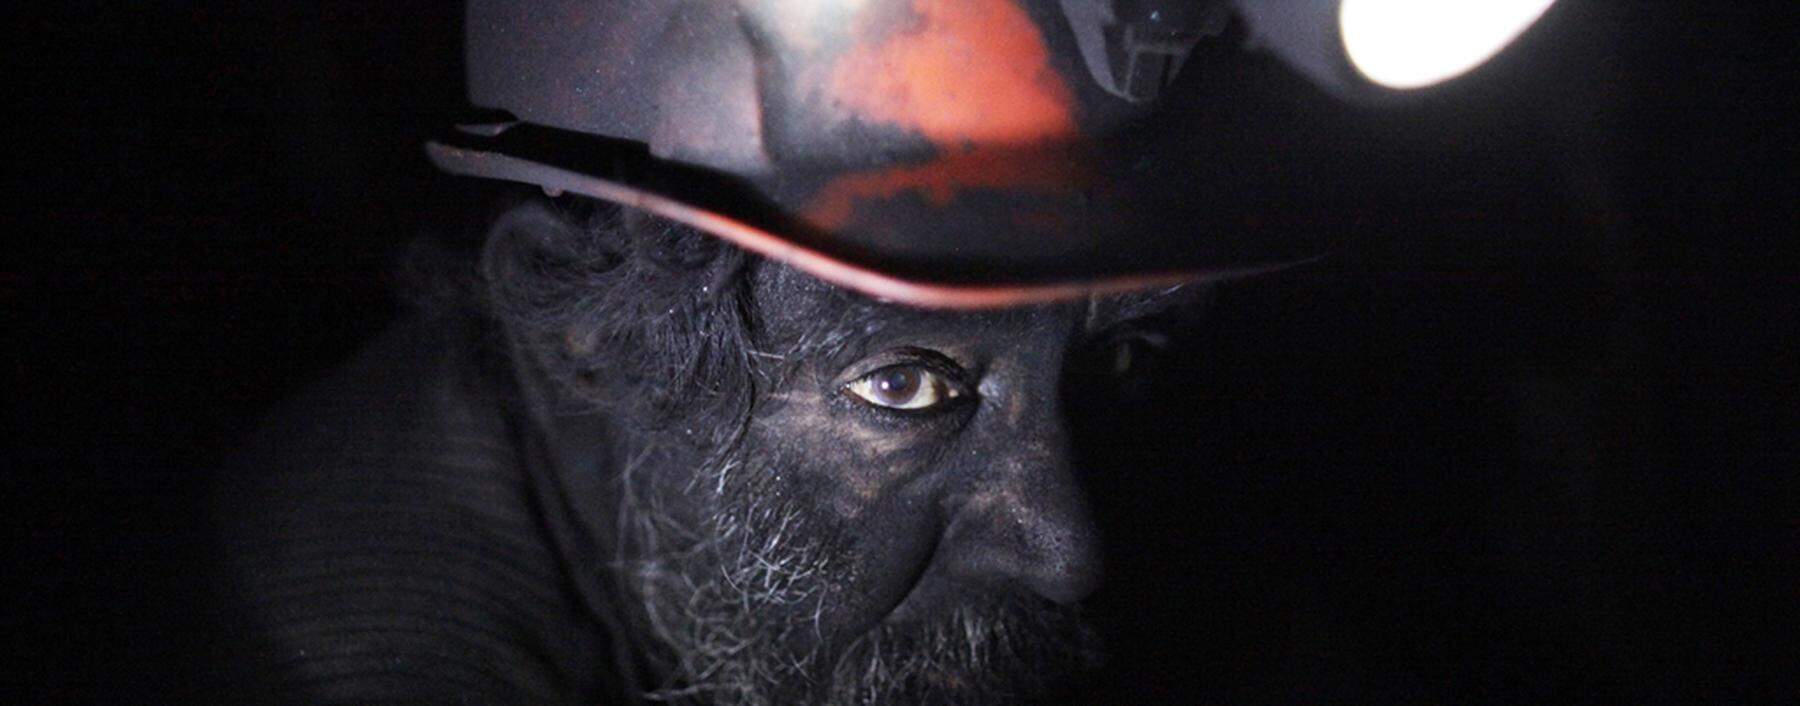 A miner takes a short break inside an unregulated coal mine in Sabinas